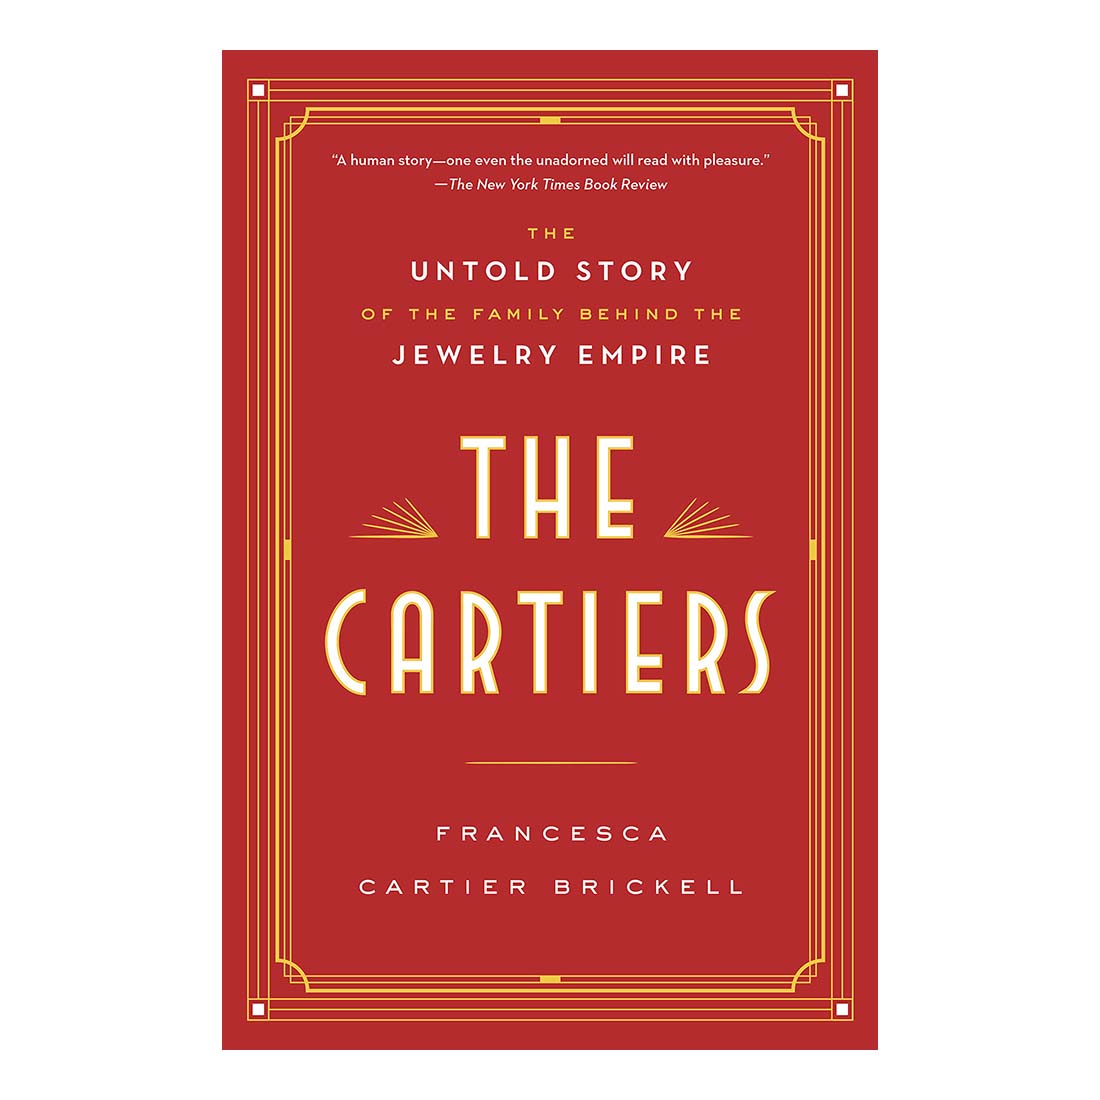 The Cartiers: The Untold Story